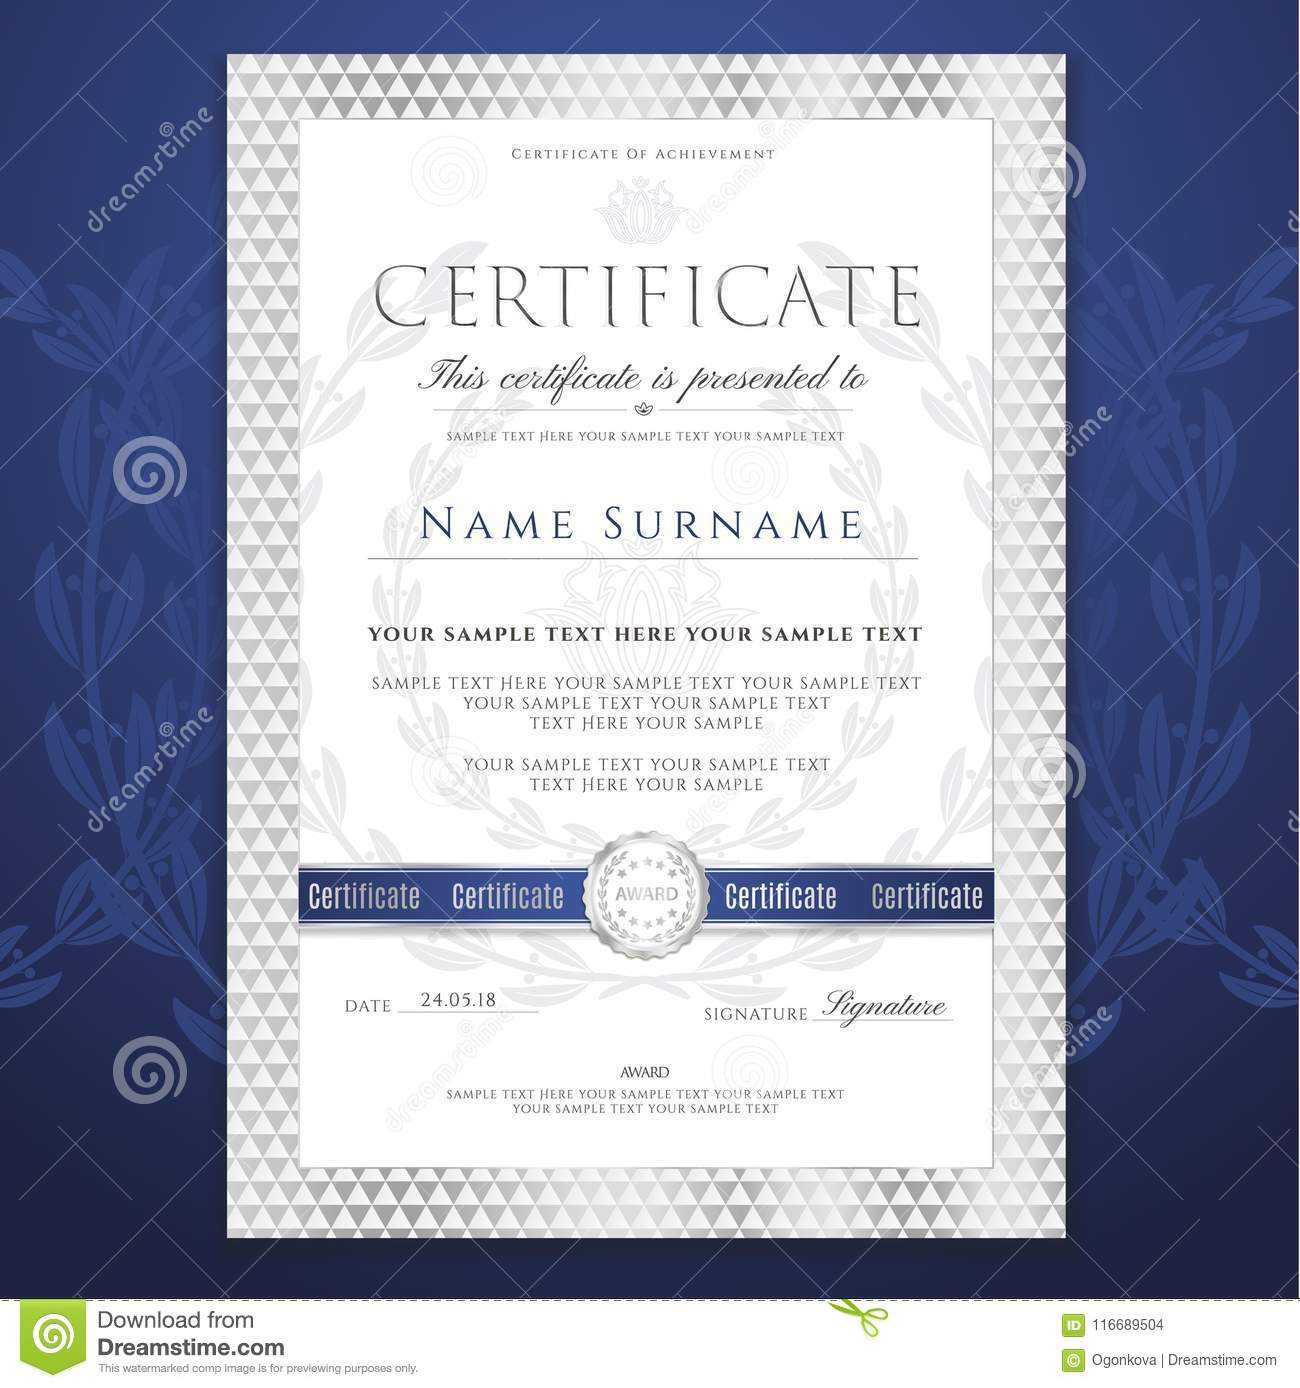 Certificate Template. Printable / Editable Design For Within Blank Certificate Of Achievement Template